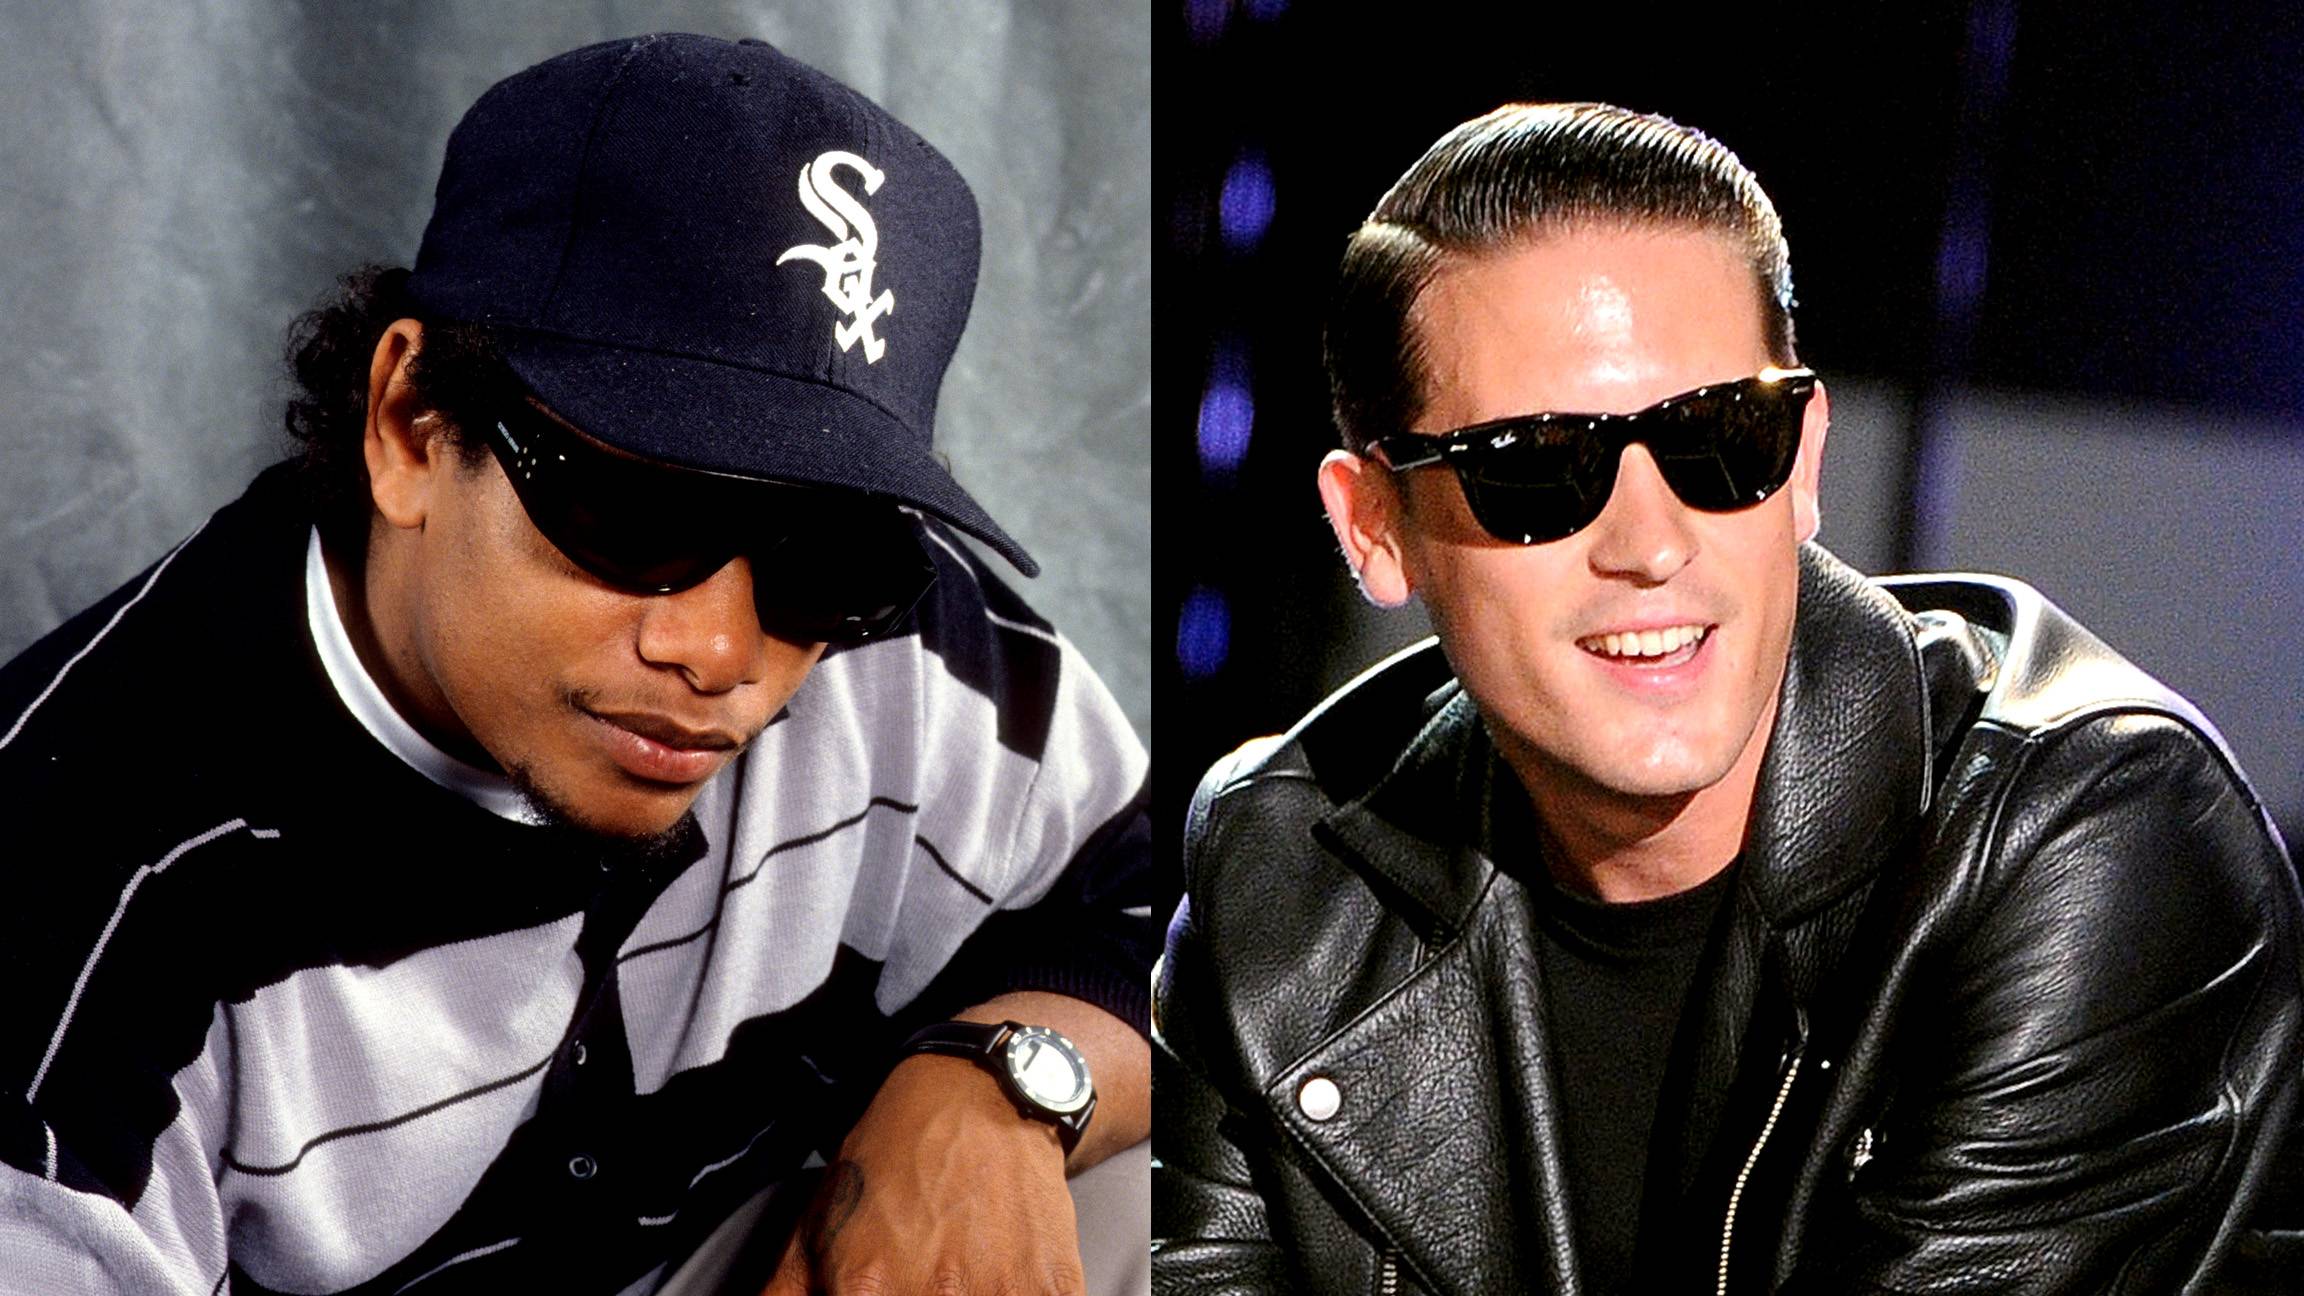 Eazy-E' Is Trending Because People Are Comparing Him To G-Eazy, News